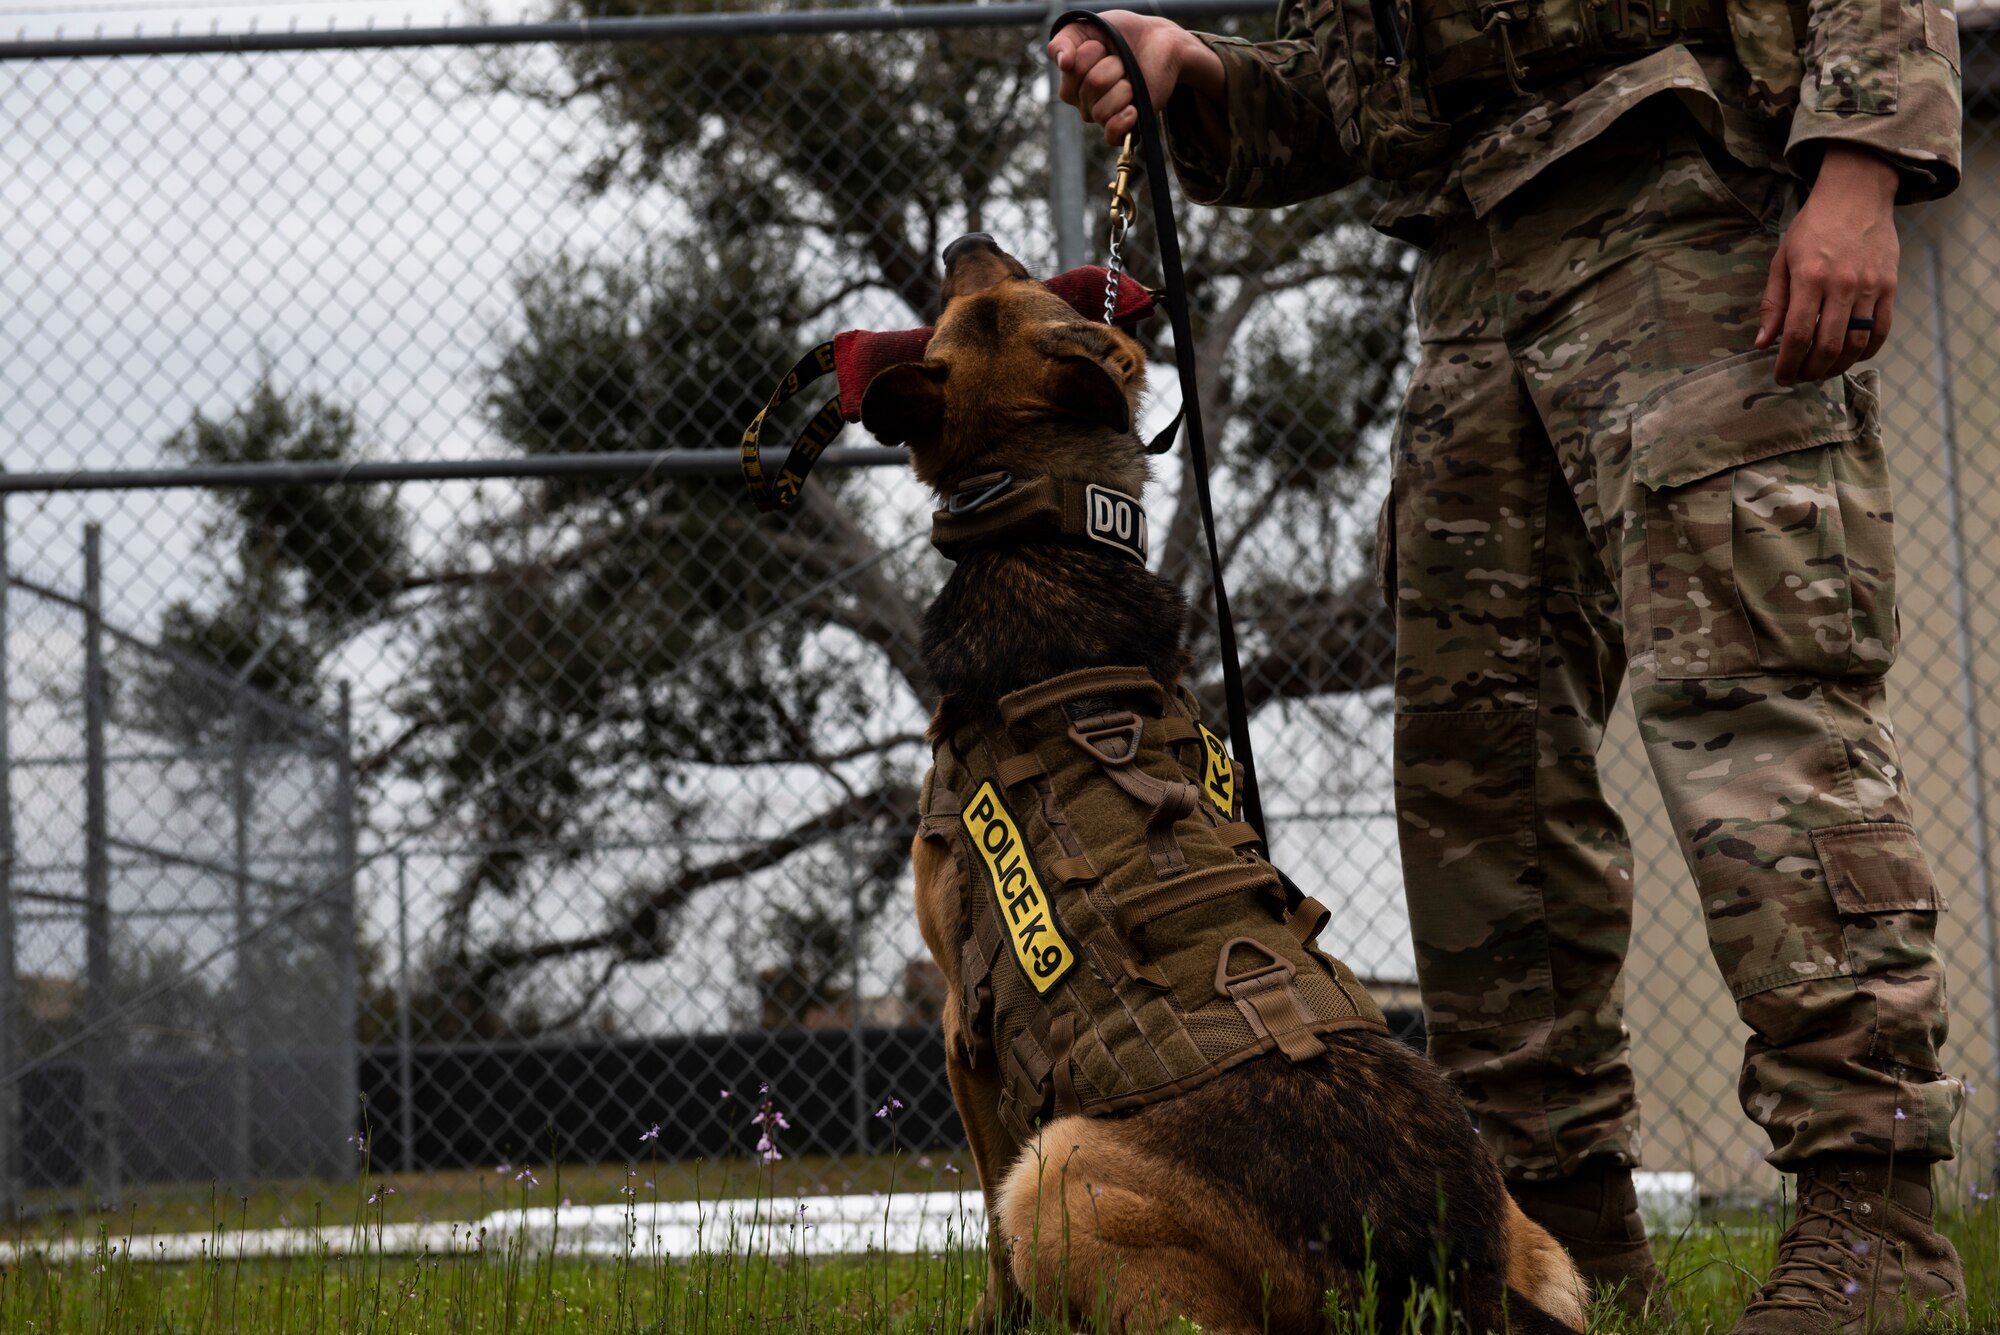 Sunny, a 325th Security Forces Squadron military working dog, chews on a piece of equipment used to train K-9s on their bite technique at Tyndall Air Force Base, Florida, March 3, 2020. Sunny and his handler, Staff Sgt. Jason Vogt, spend multiple hours training together to keep the team sharp. This photo was taken while doing a demonstration for K-9 Veterans Day. (U.S. Air Force photo by Staff Sgt. Magen M. Reeves)